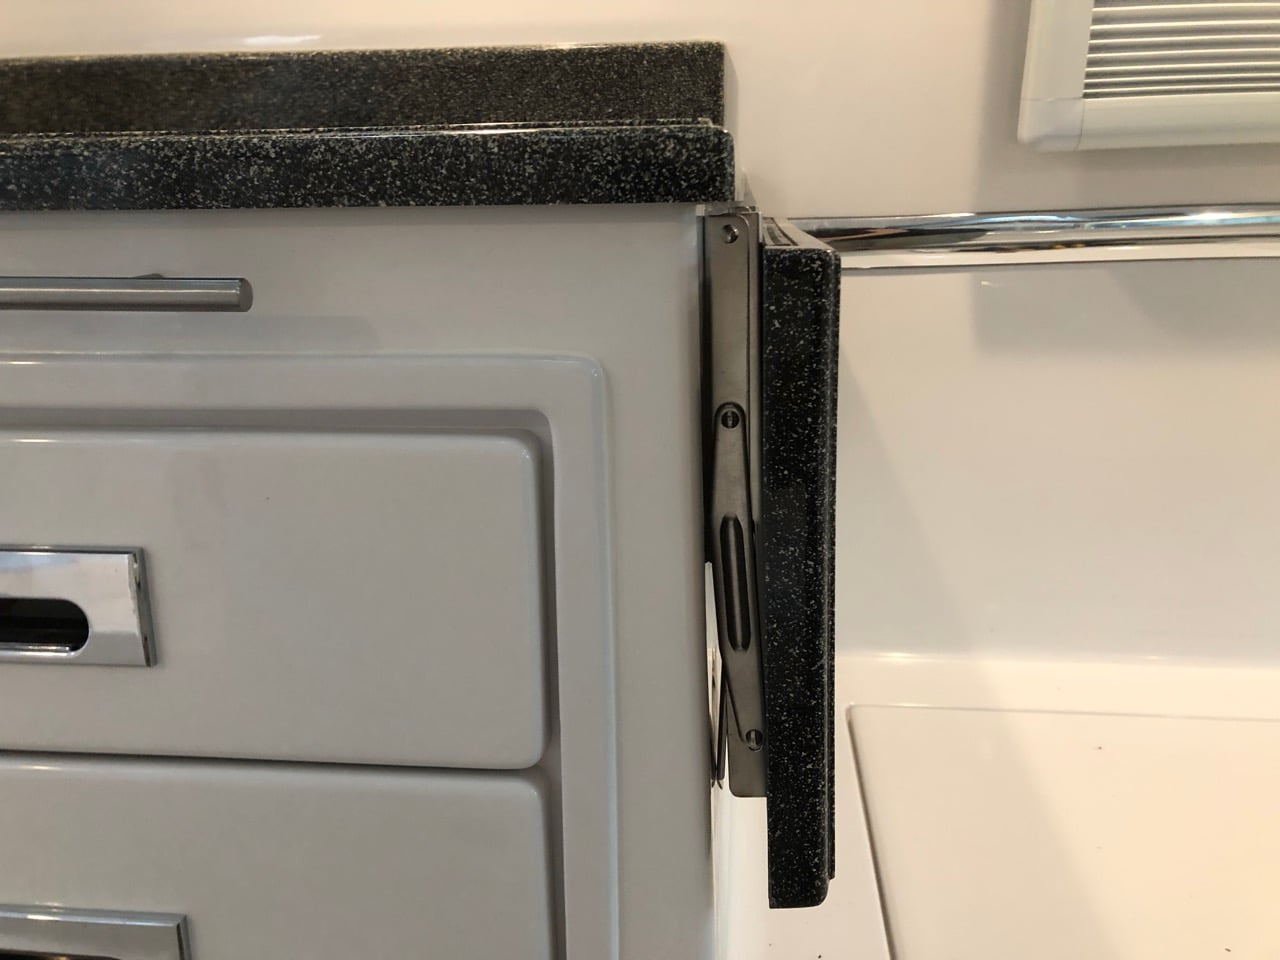 Fold Down Counter Extension - Ollie Modifications - Oliver Owner Forums